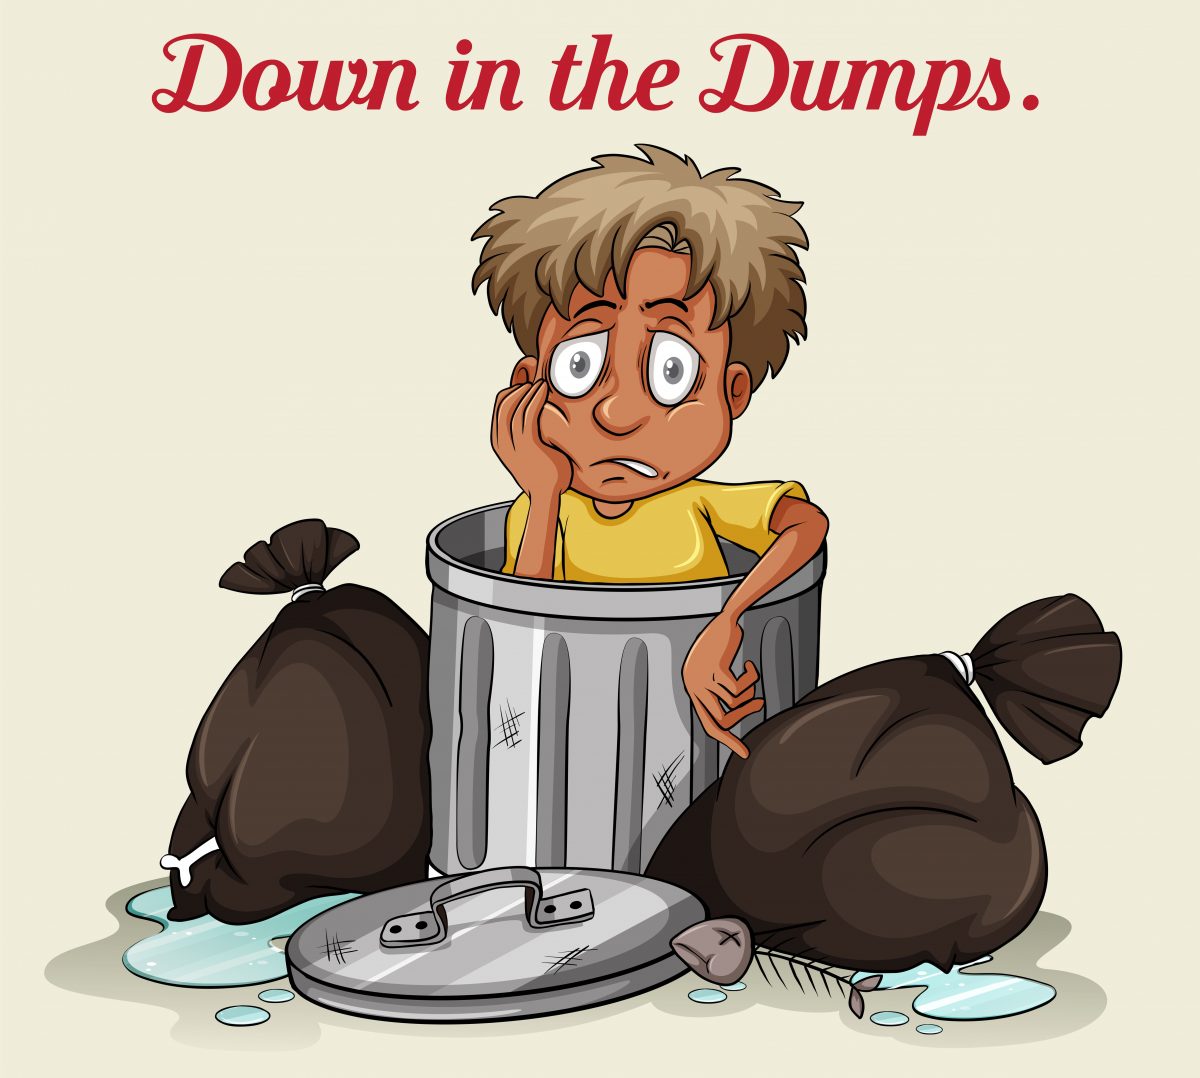 Idiomy v angličtine - Down in the dumps